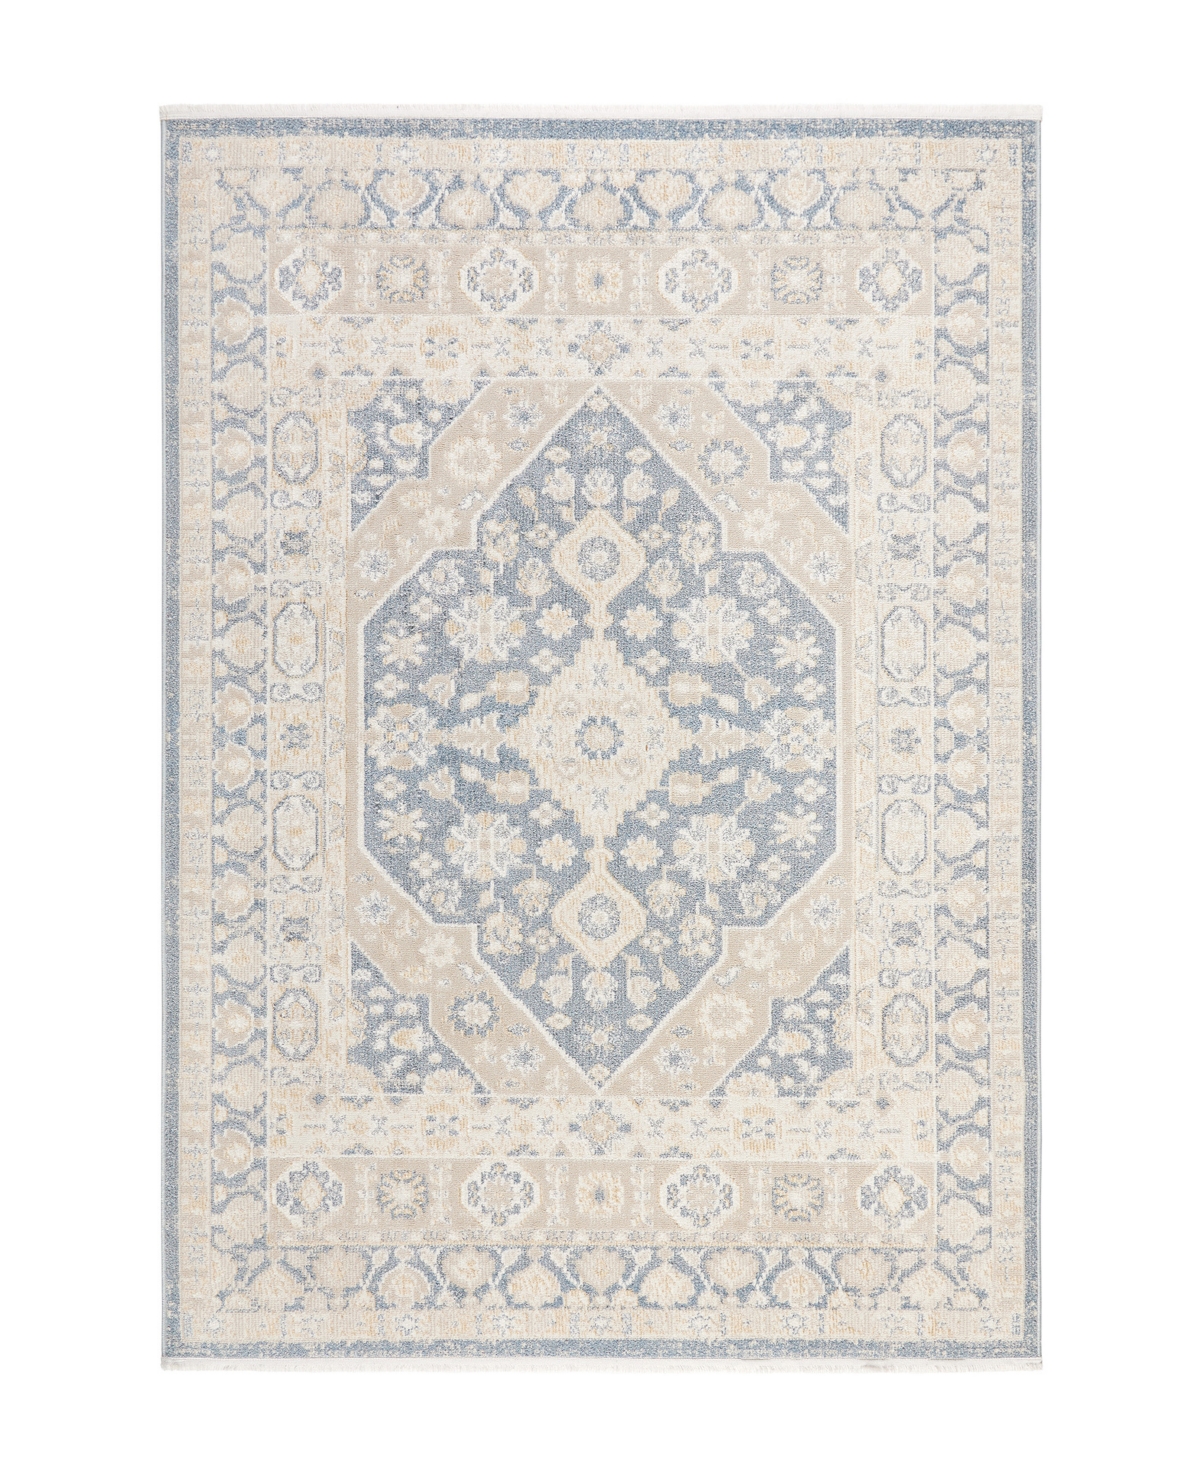 Town & Country Living Everyday Rein Everwash 17 6'6" X 9'6" Area Rug In Blue,beige